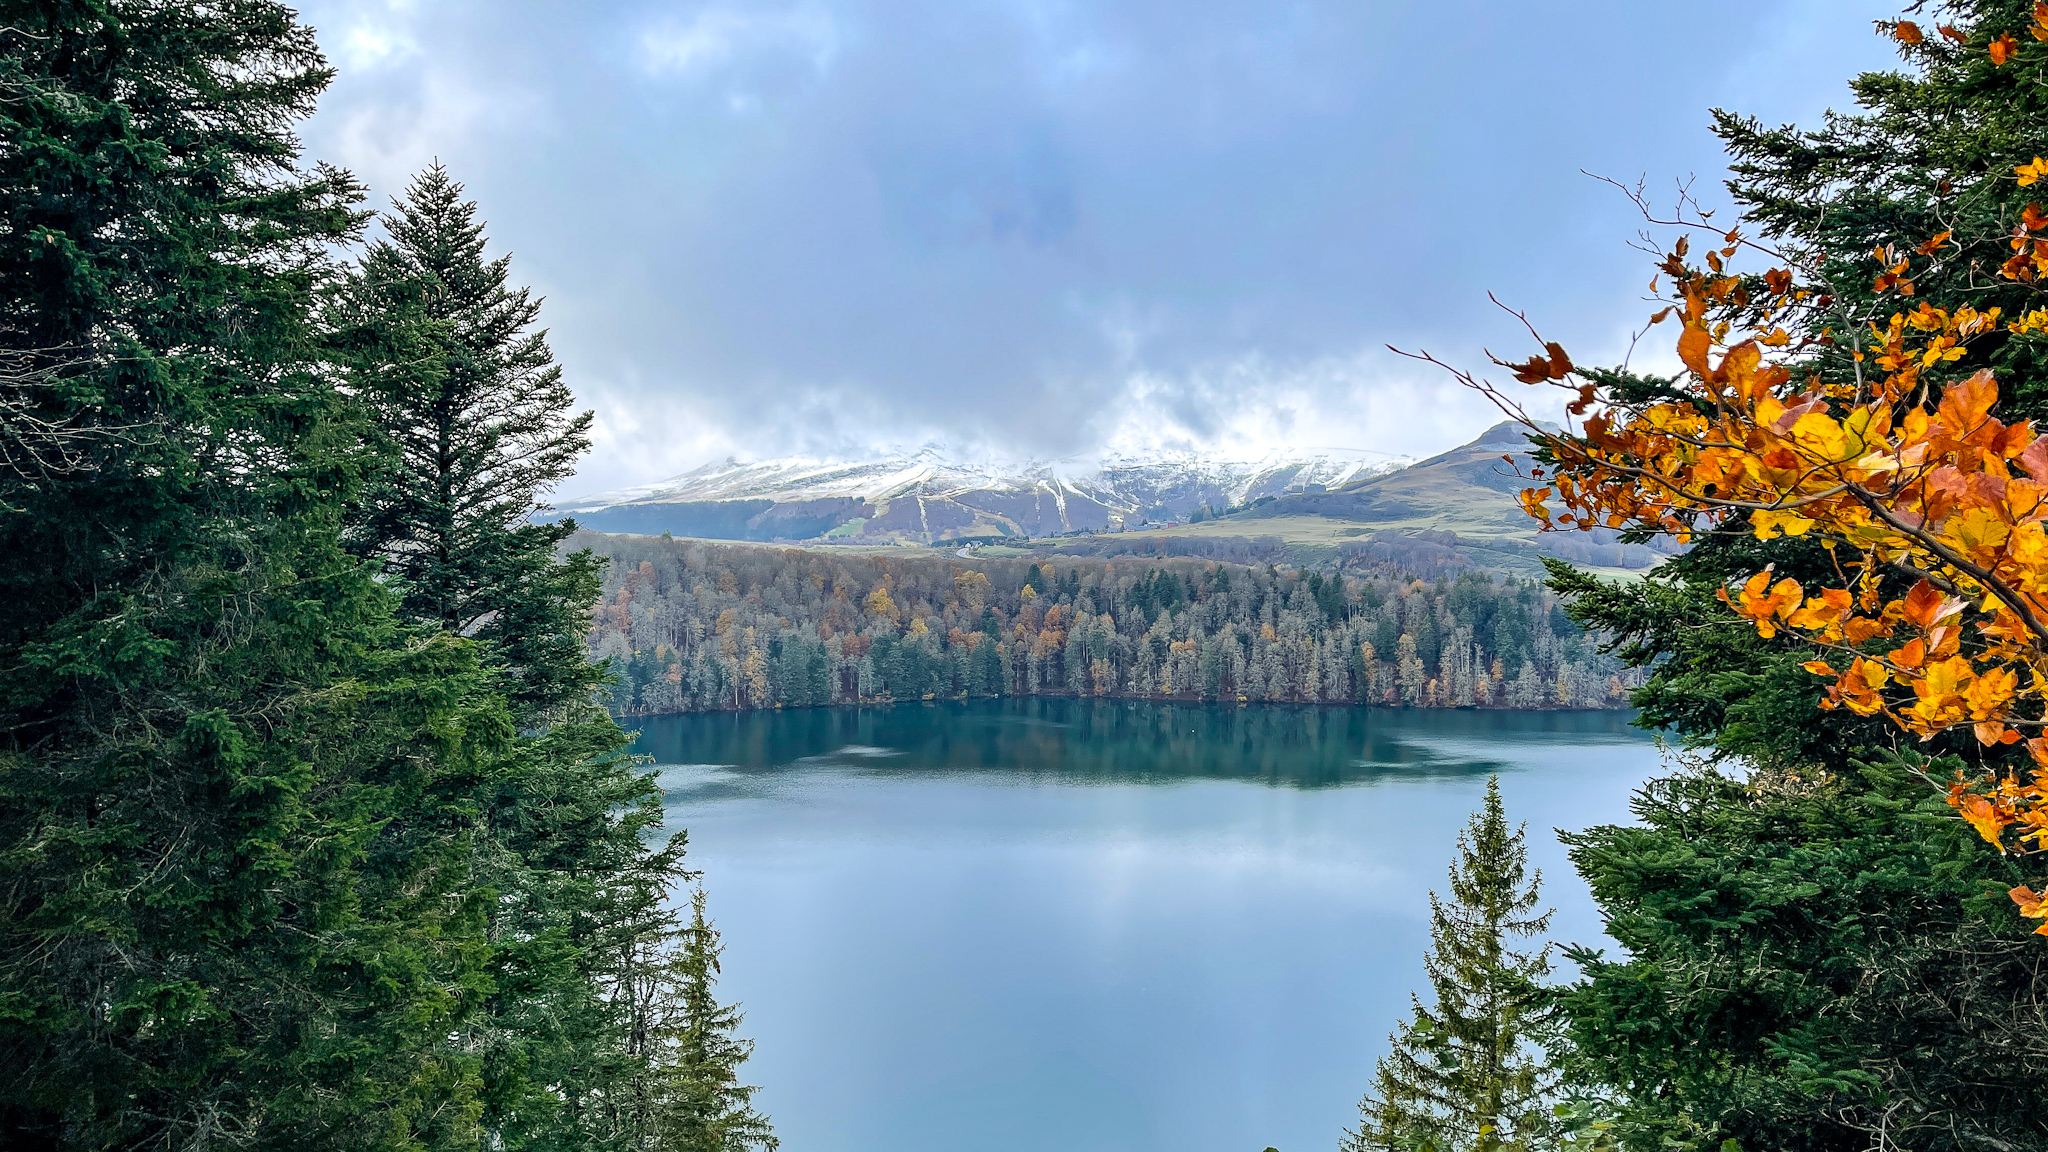 In Autumn, Lac Pavin and the beautiful colors of the trees